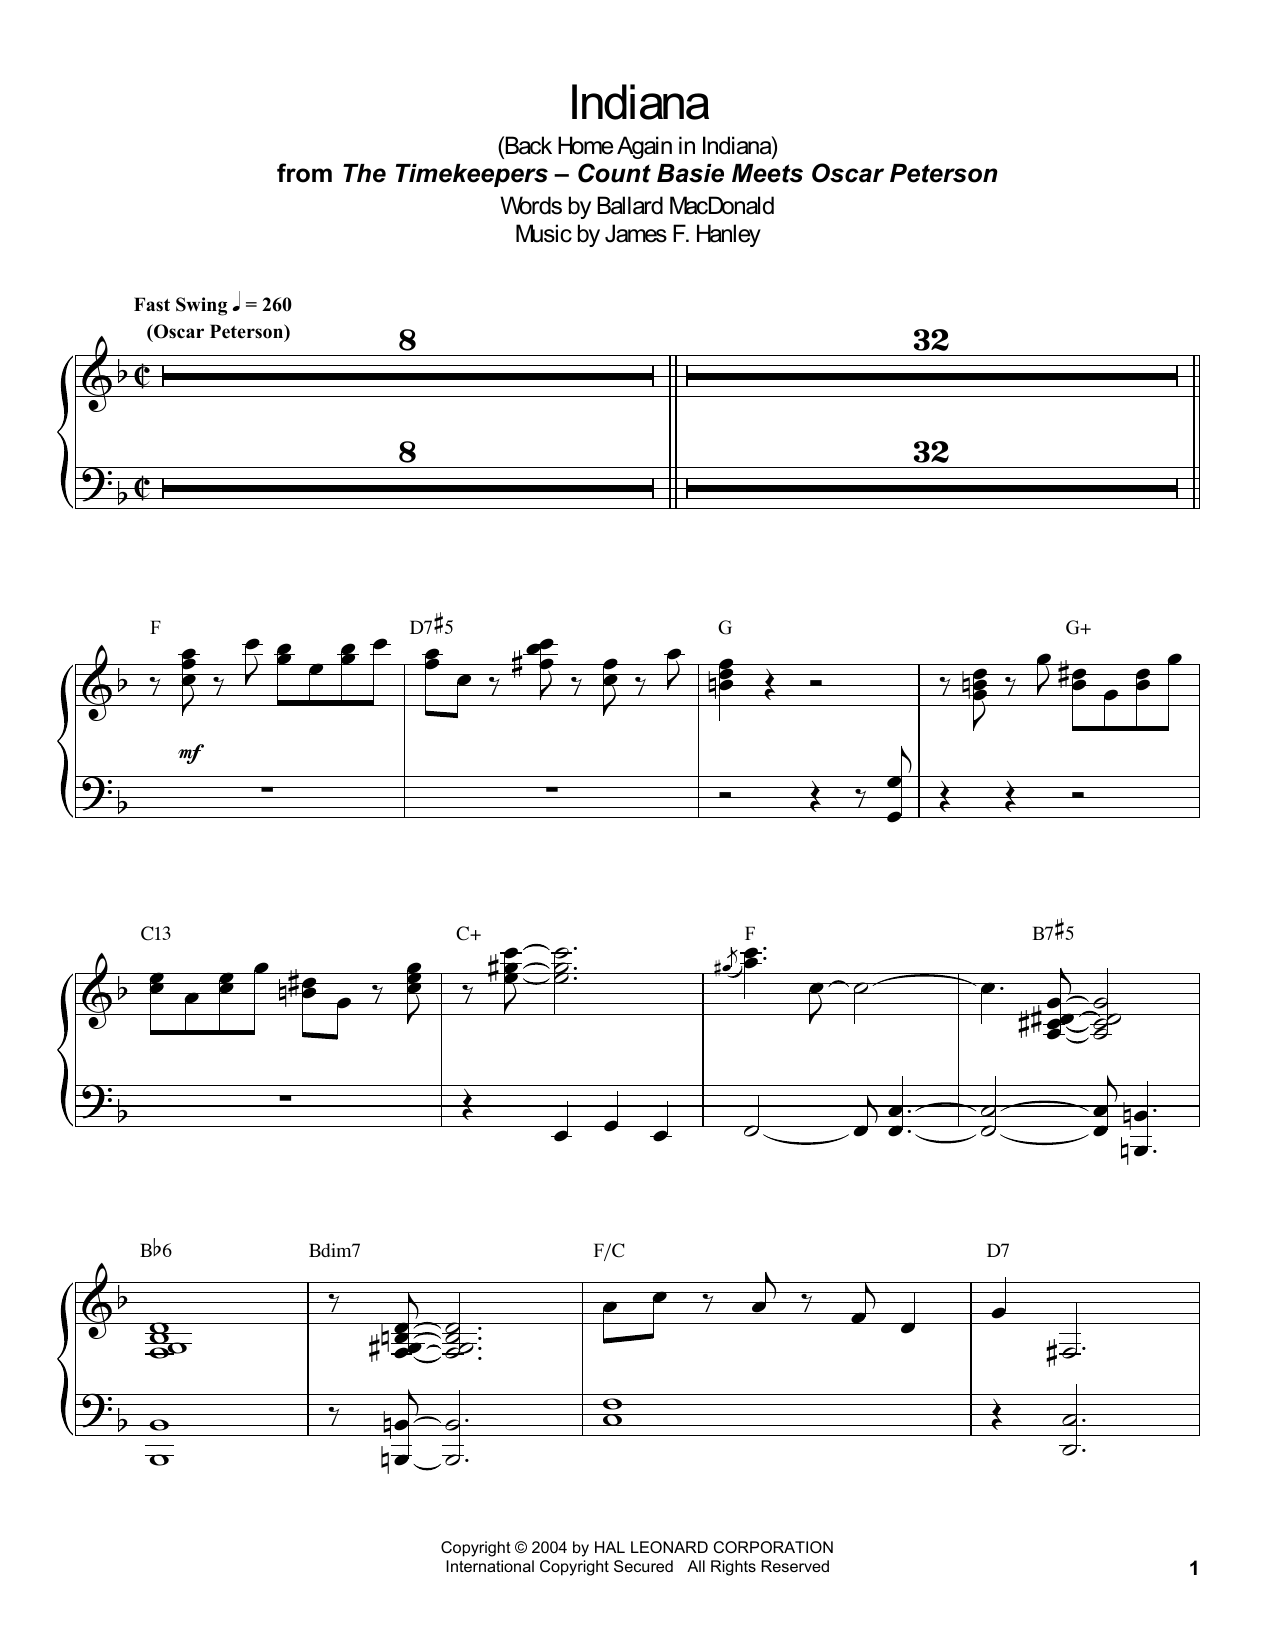 Download Count Basie Indiana (Back Home Again In Indiana) Sheet Music